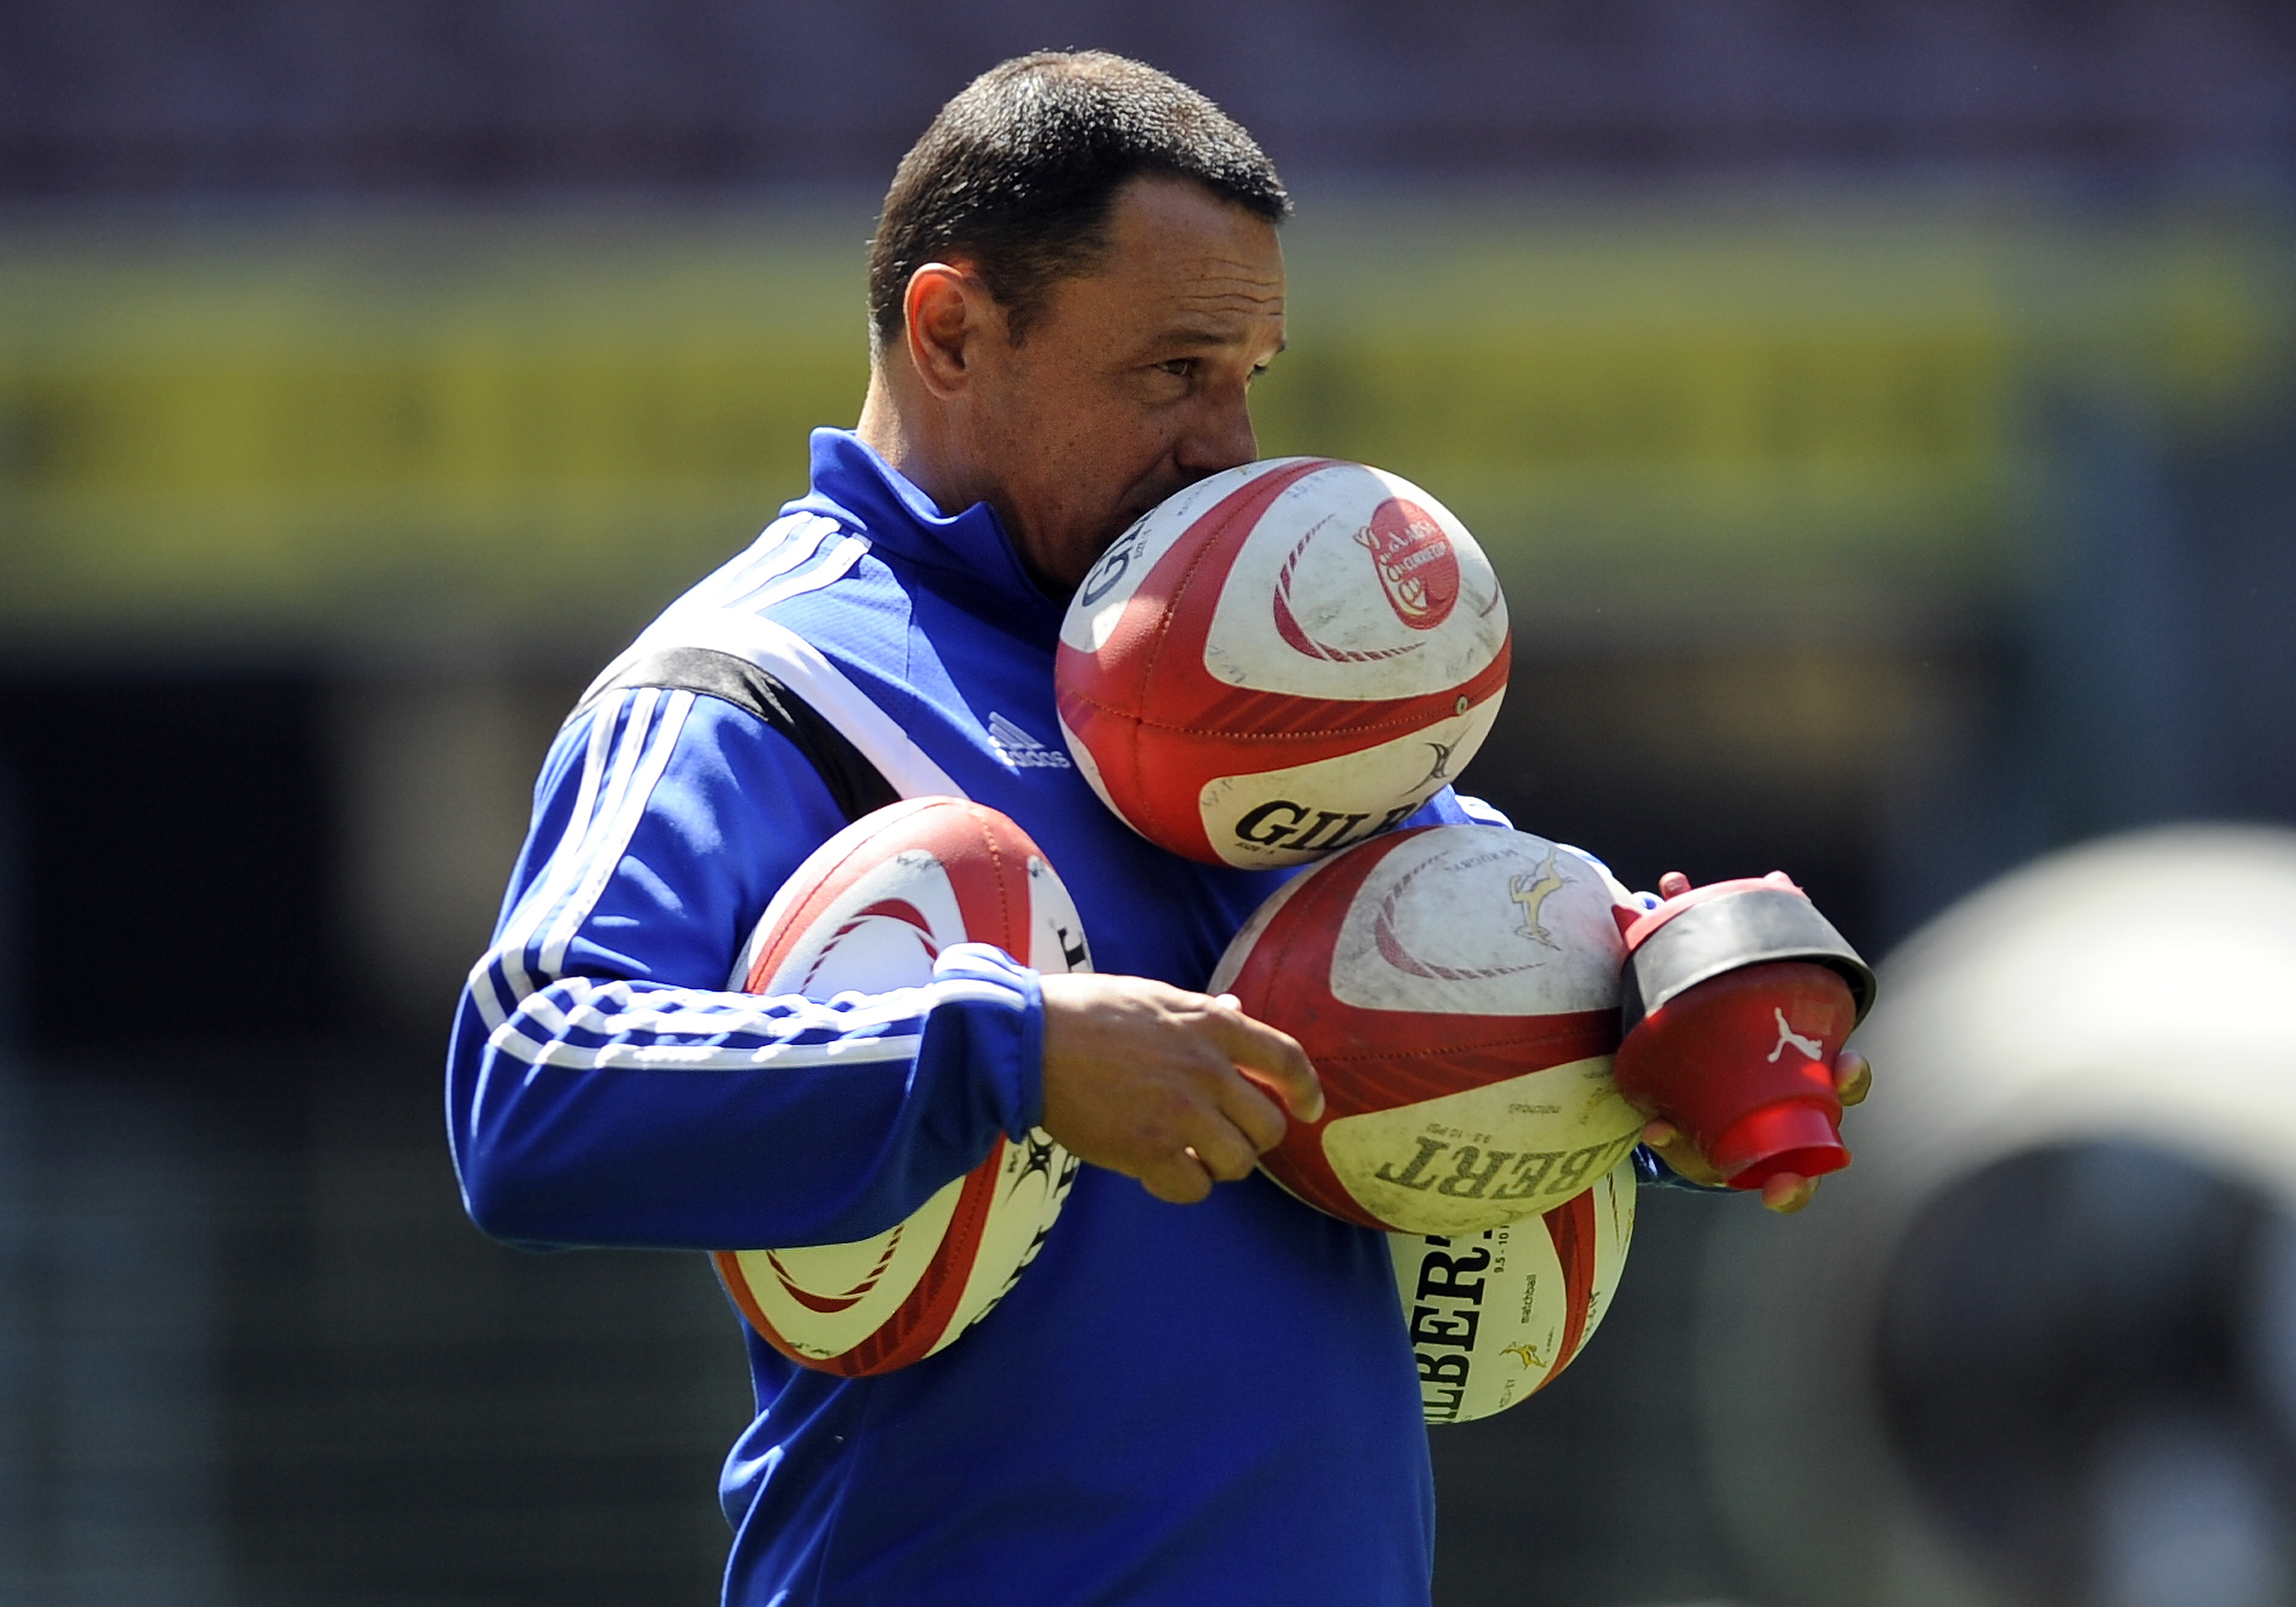 France kicking coach Vlok Cilliers